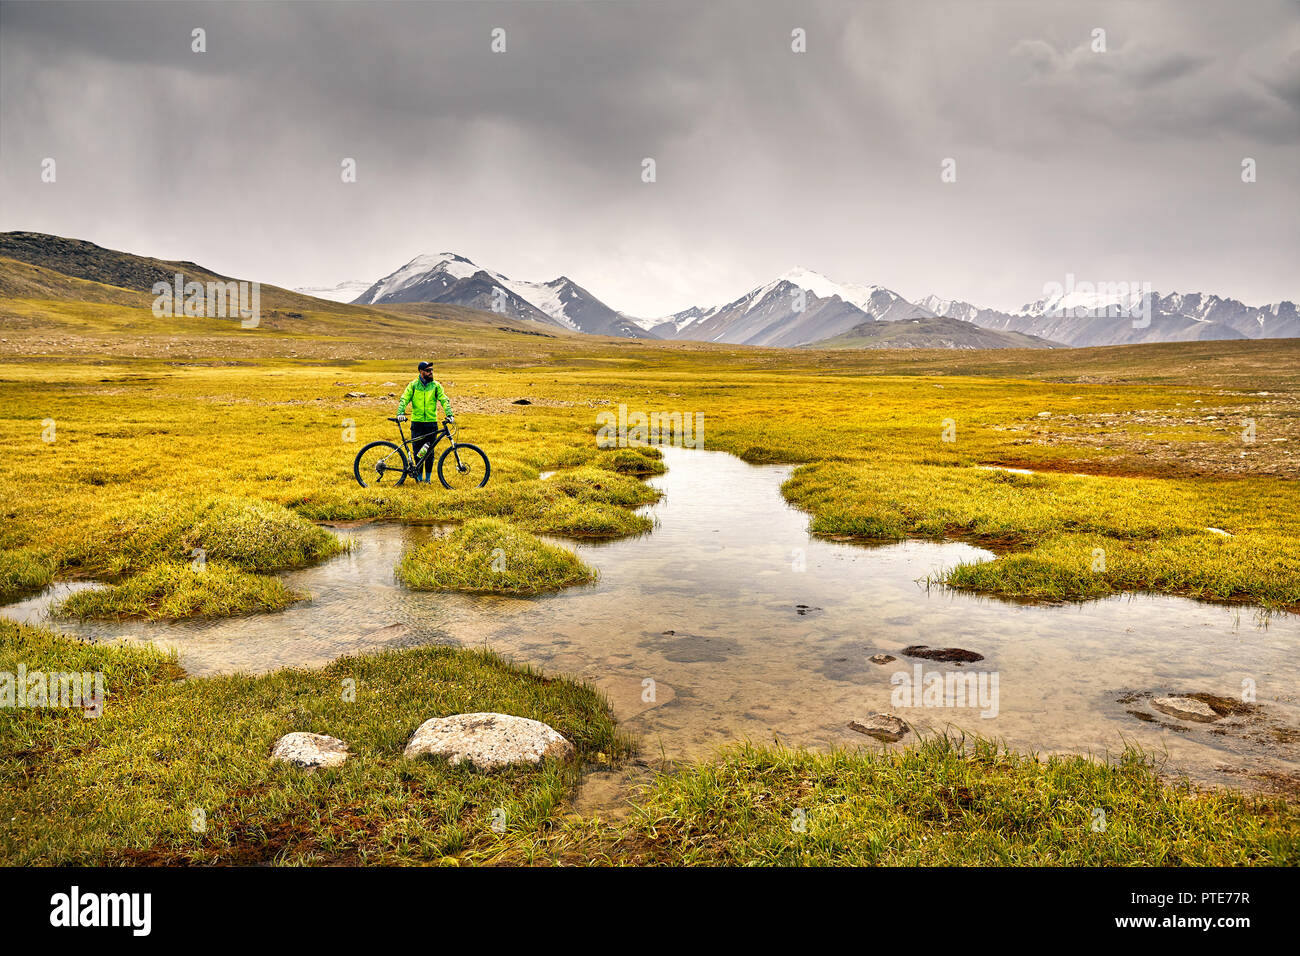 Man on mountain bike in green jacket near lake at stormy sky background. Stock Photo